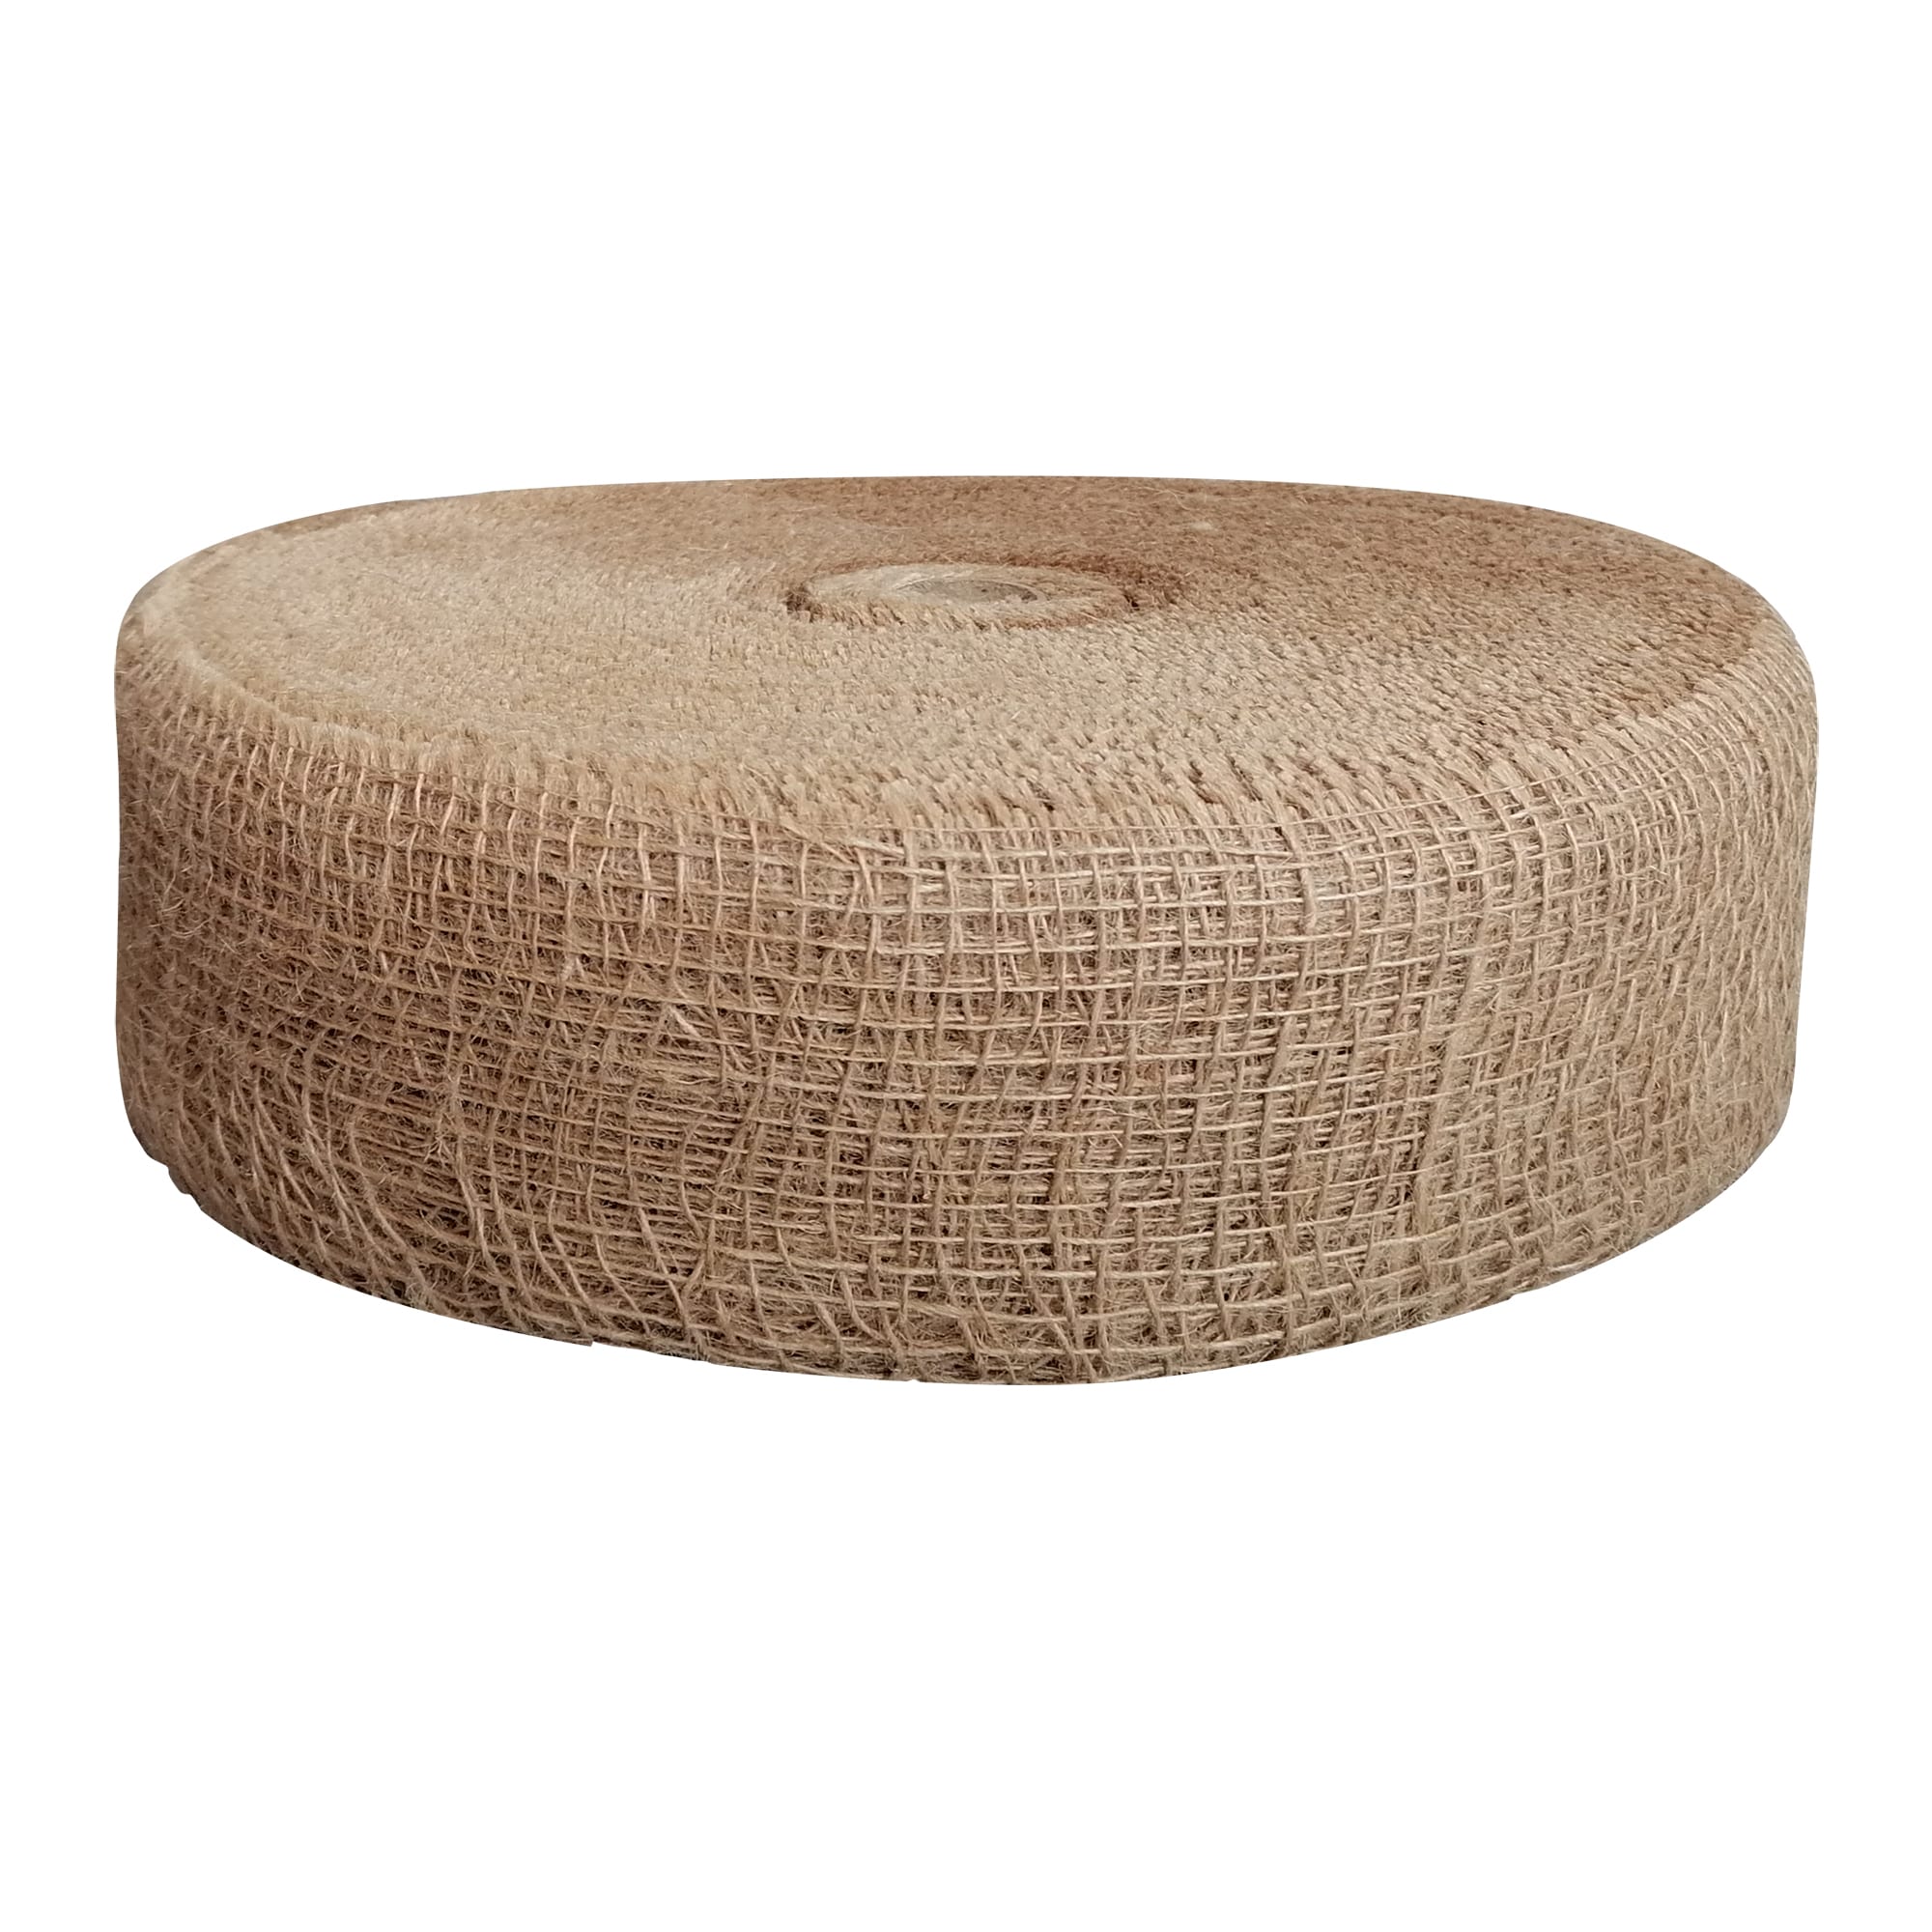 Wellco 7.8 in. x 9.8 ft. Natural Burlap Tree Wrap Burlap Rolls for  Gardening Tree Protector for Warmth and Moisture (4-Rolls) BTW20300W4 - The  Home Depot